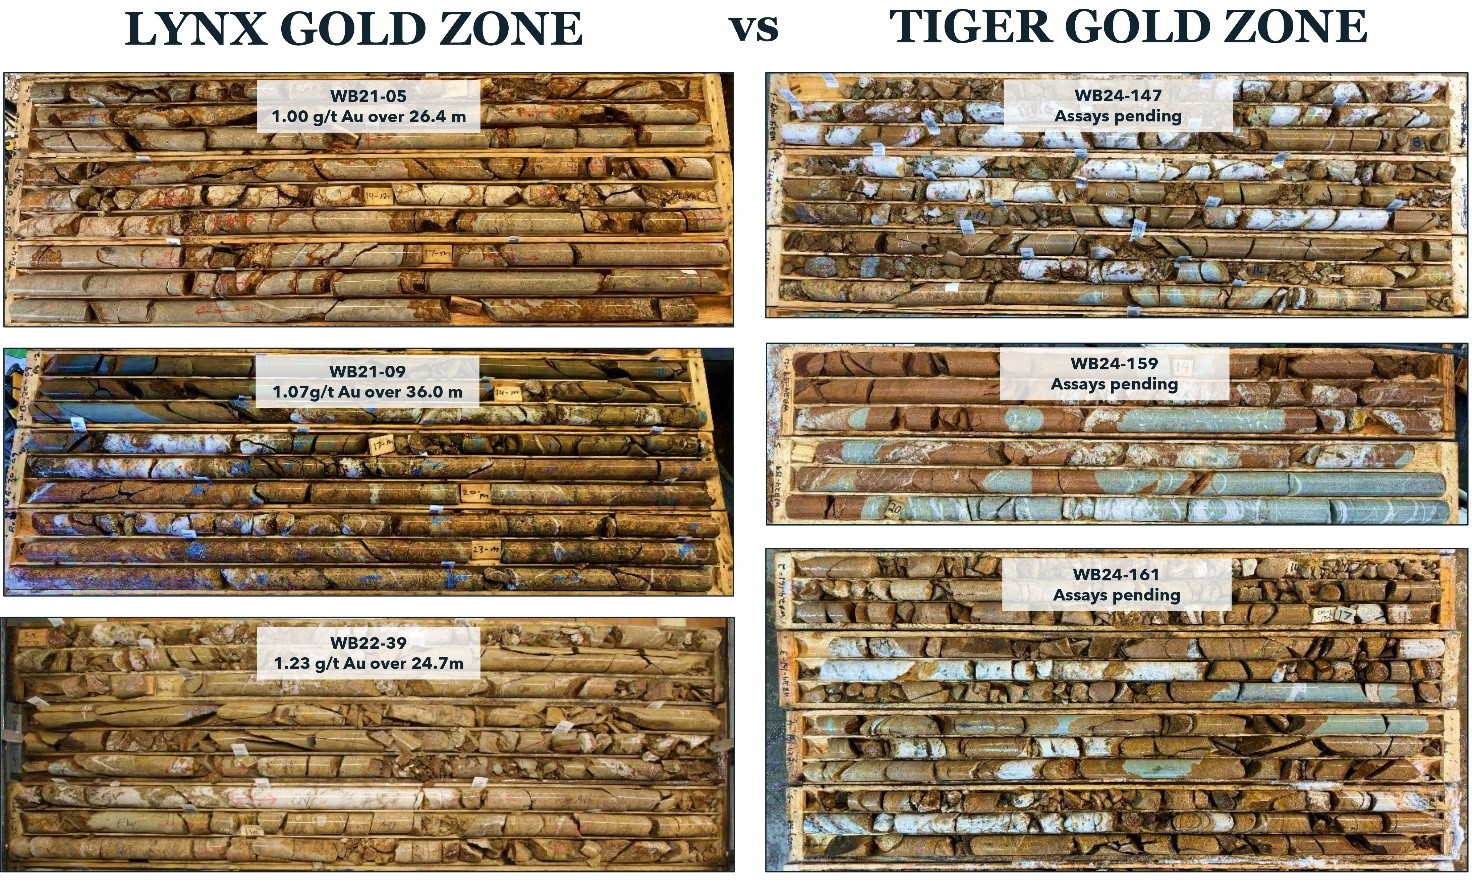 Visual comparison of core from the Lynx and Tiger Gold Zones